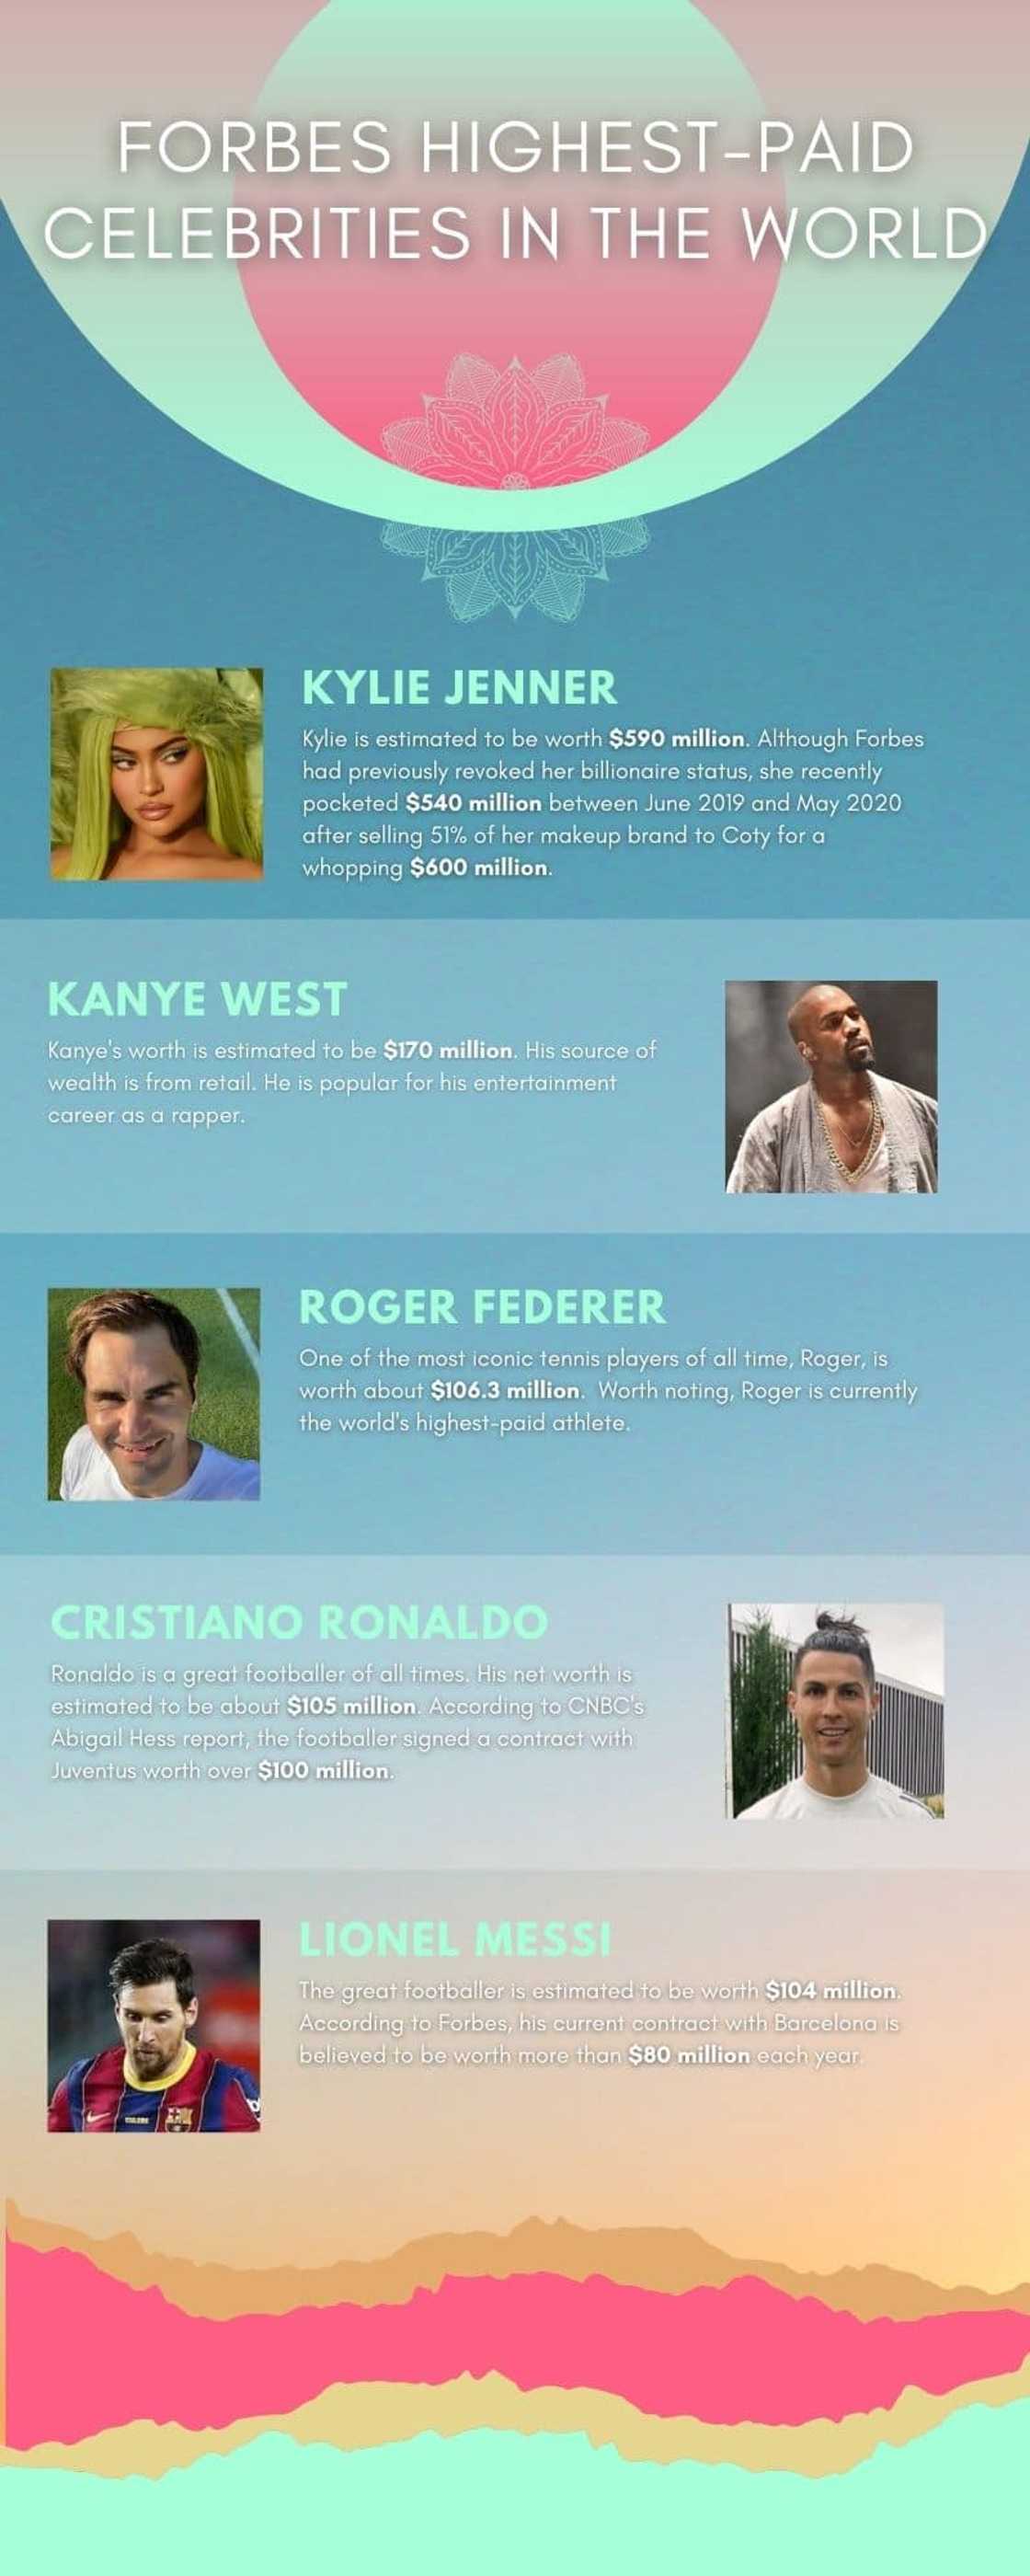 Forbes highest-paid celebrities in the world